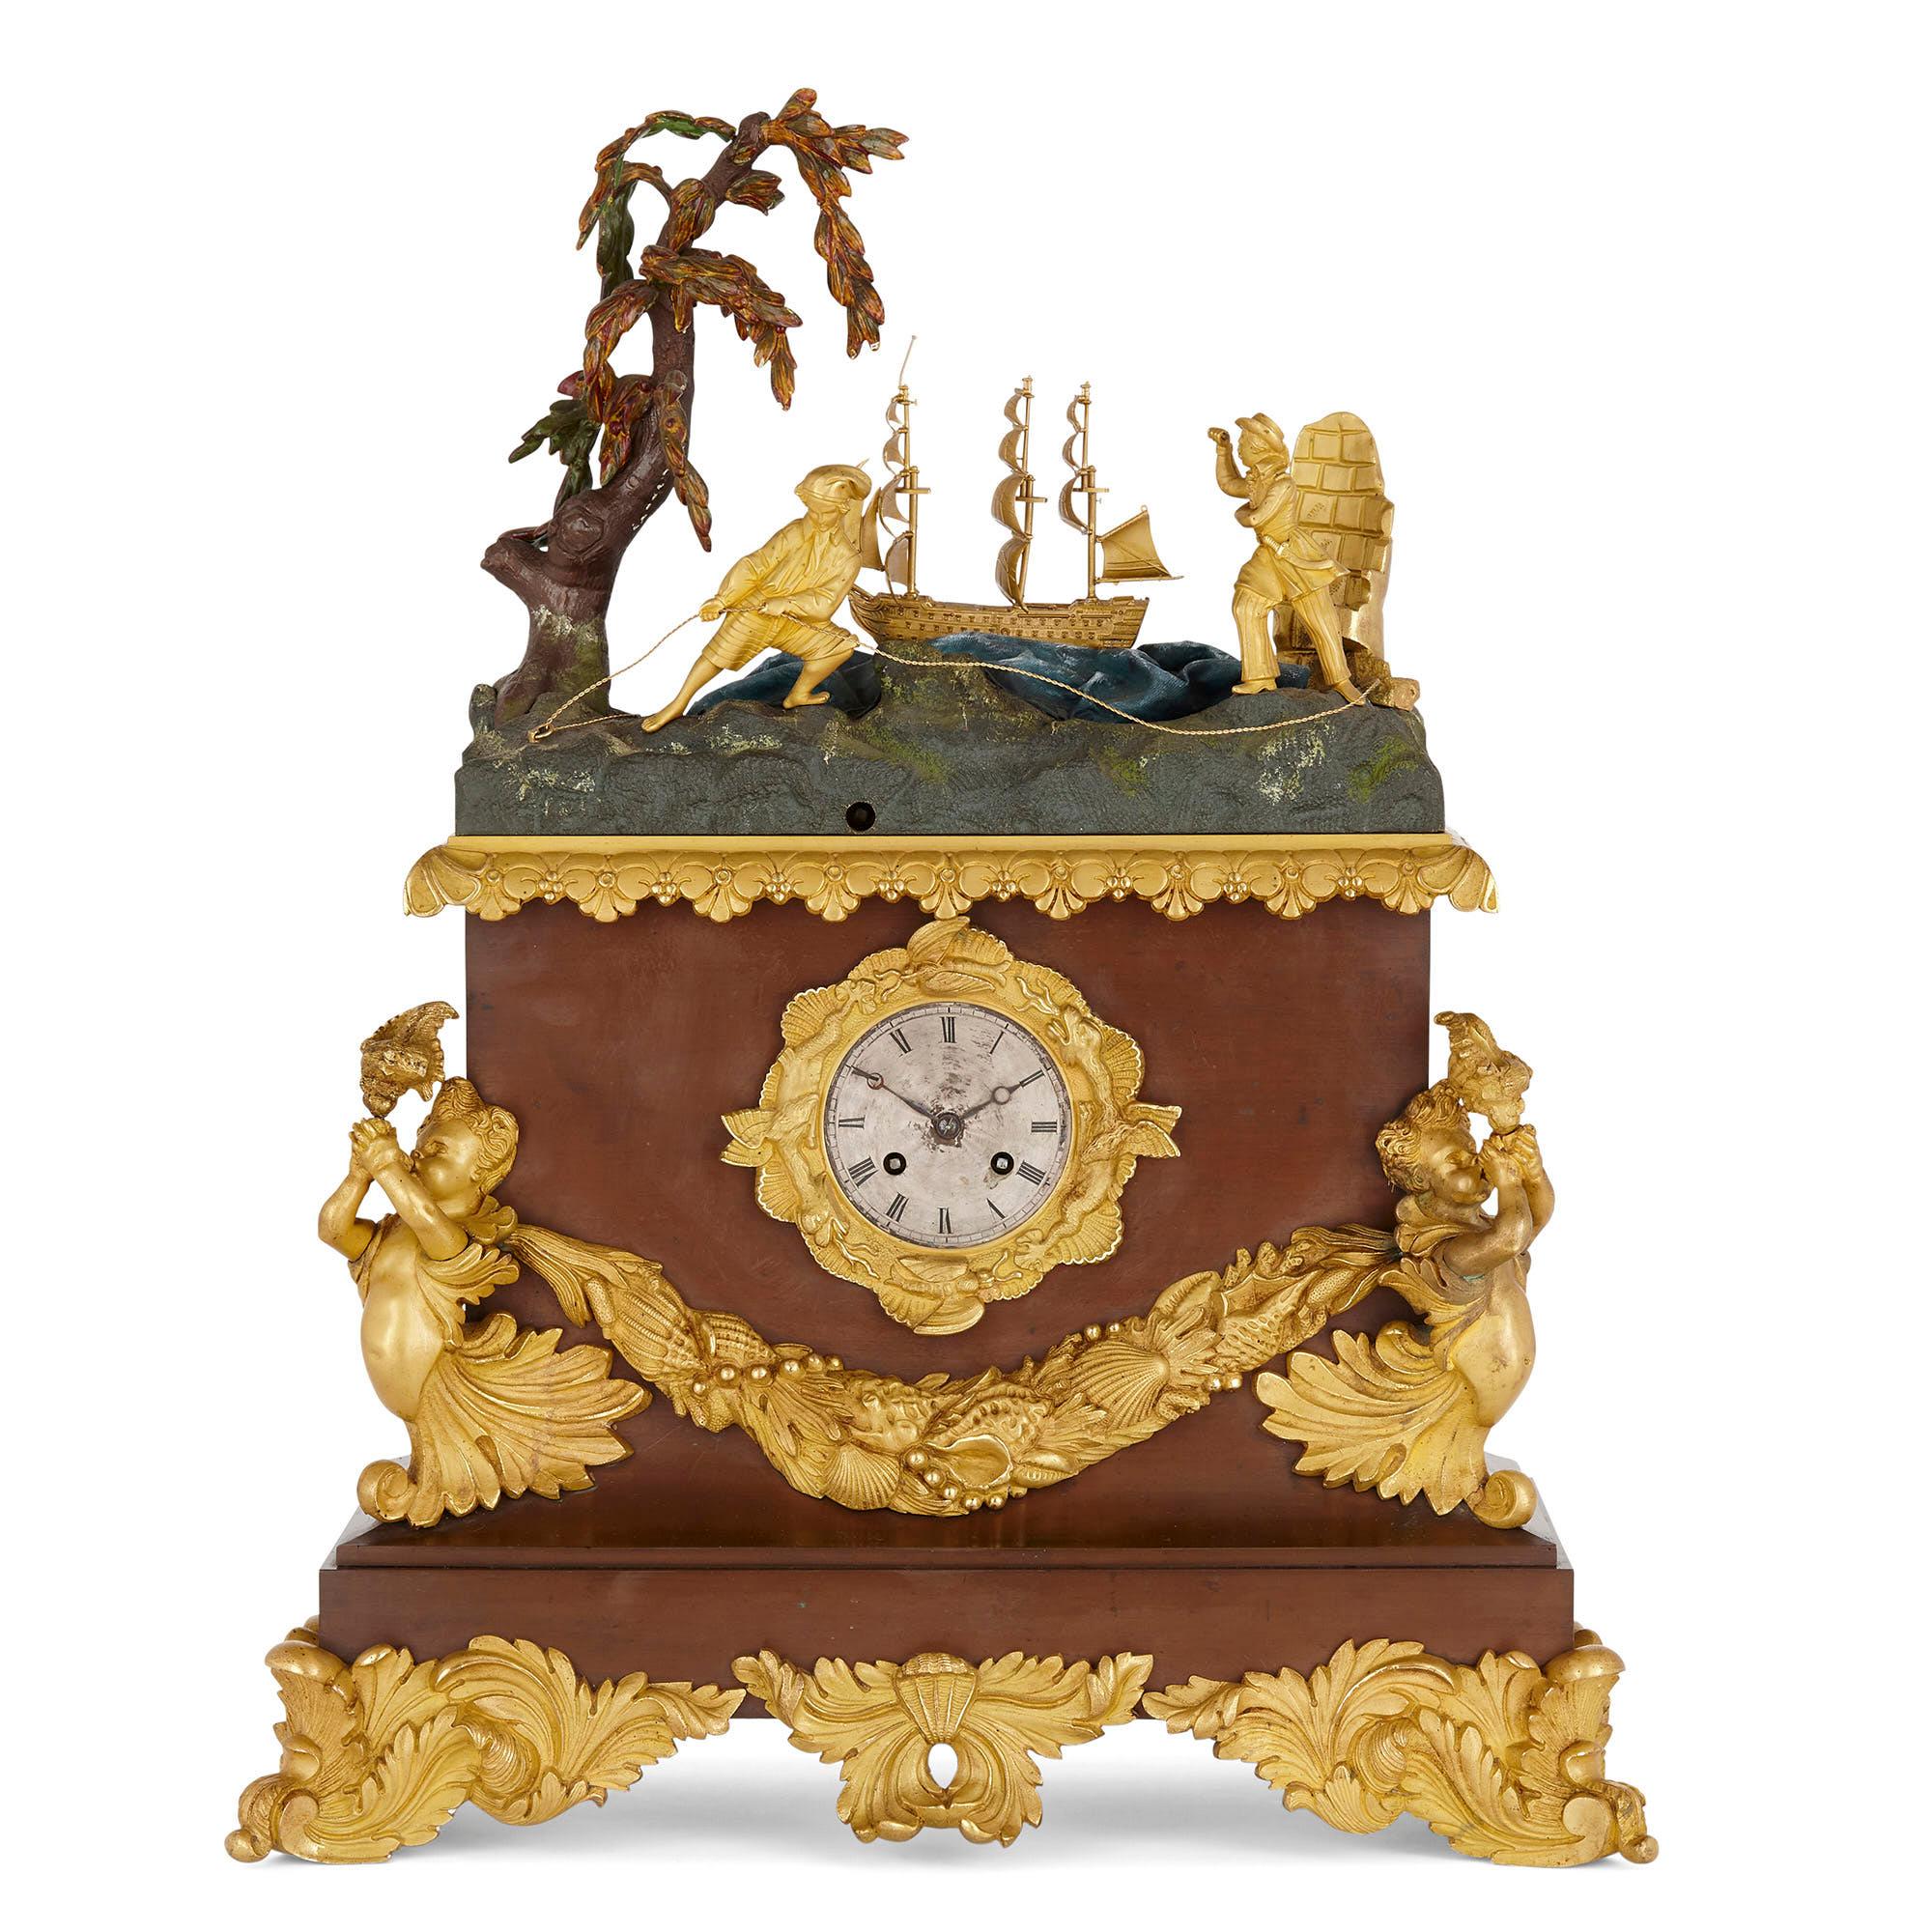 French gilt bronze mounted marine themed automaton mantel clock
French, circa 1850
Measures: With glass dome and base height 90 cm, width 70 cm, depth 33 cm
Clock without dome and base height 60 cm, width 47 cm, depth 20 cm

This unusual clock